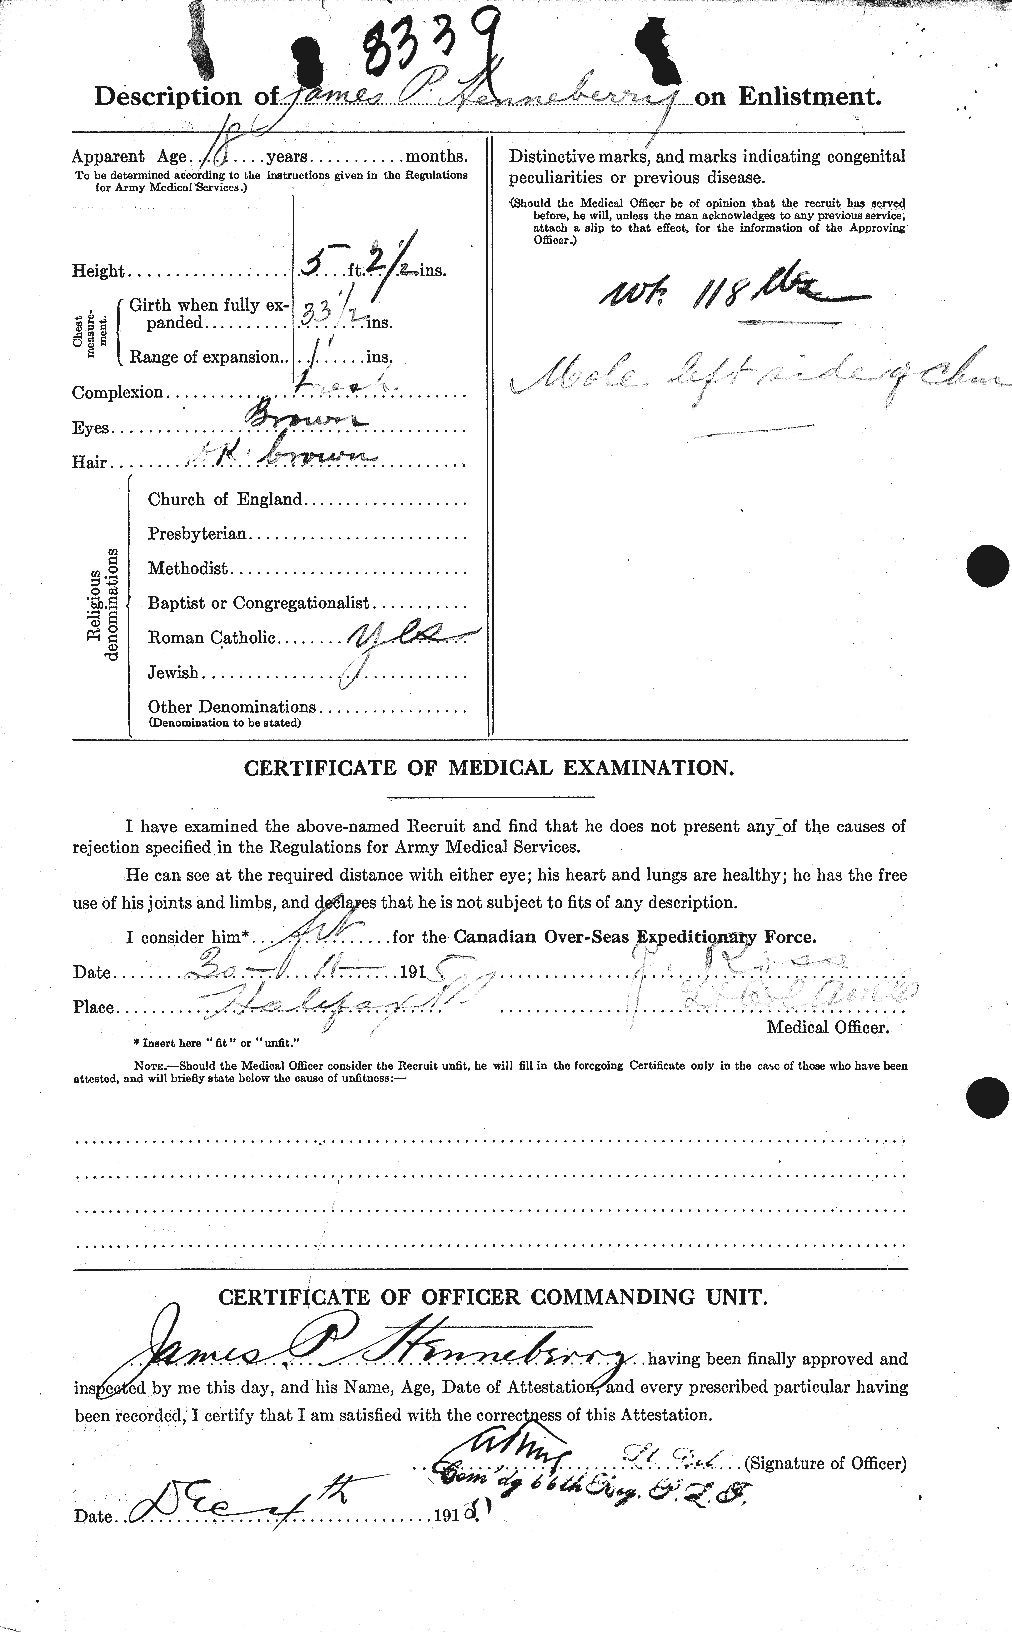 Personnel Records of the First World War - CEF 391456b